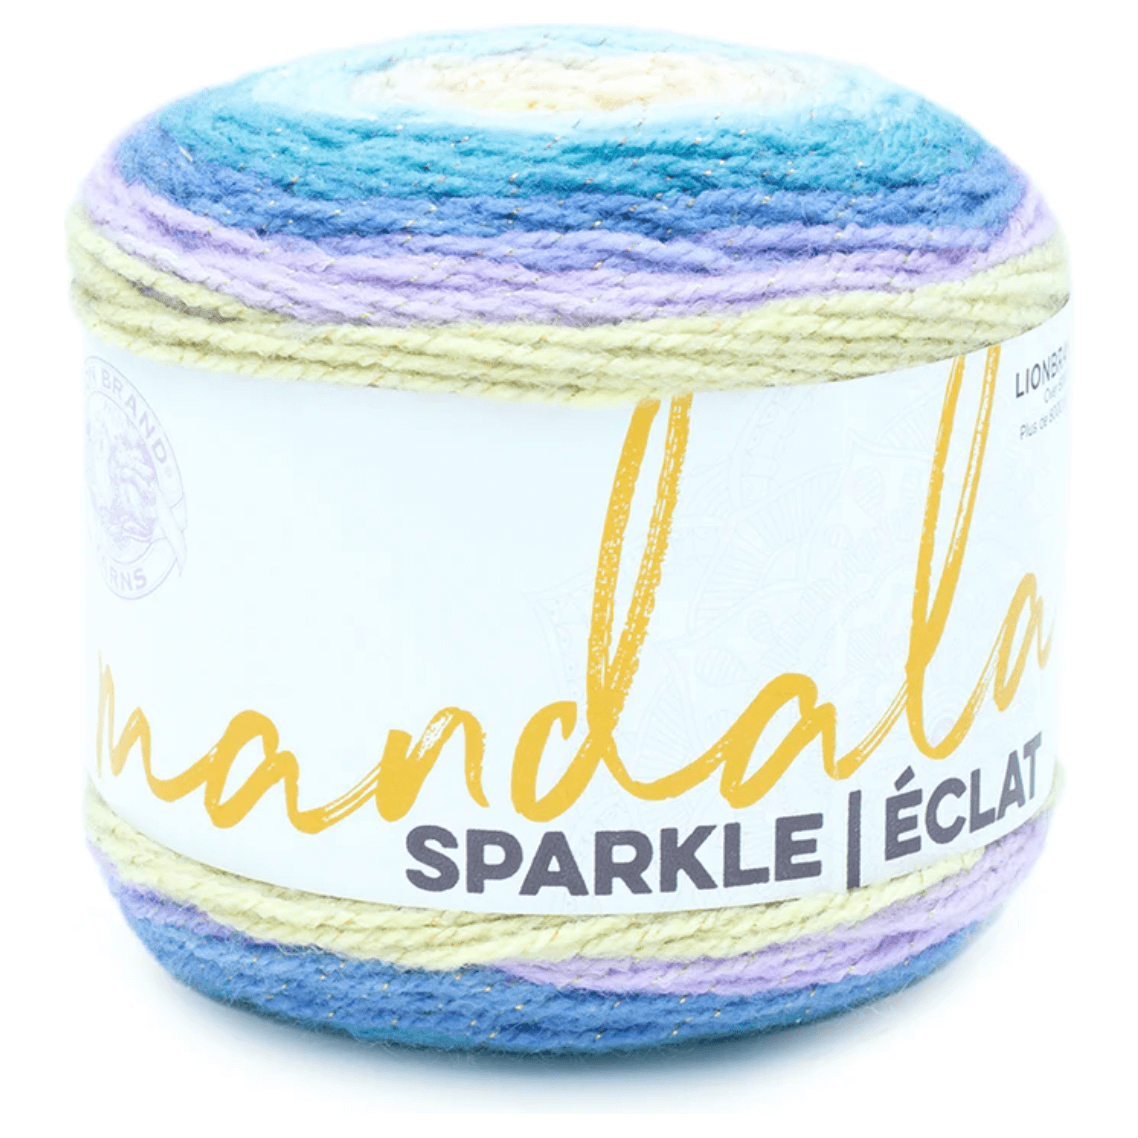 Lion Brand Mandala Sparkle Yarn Sold As A 3 Pack